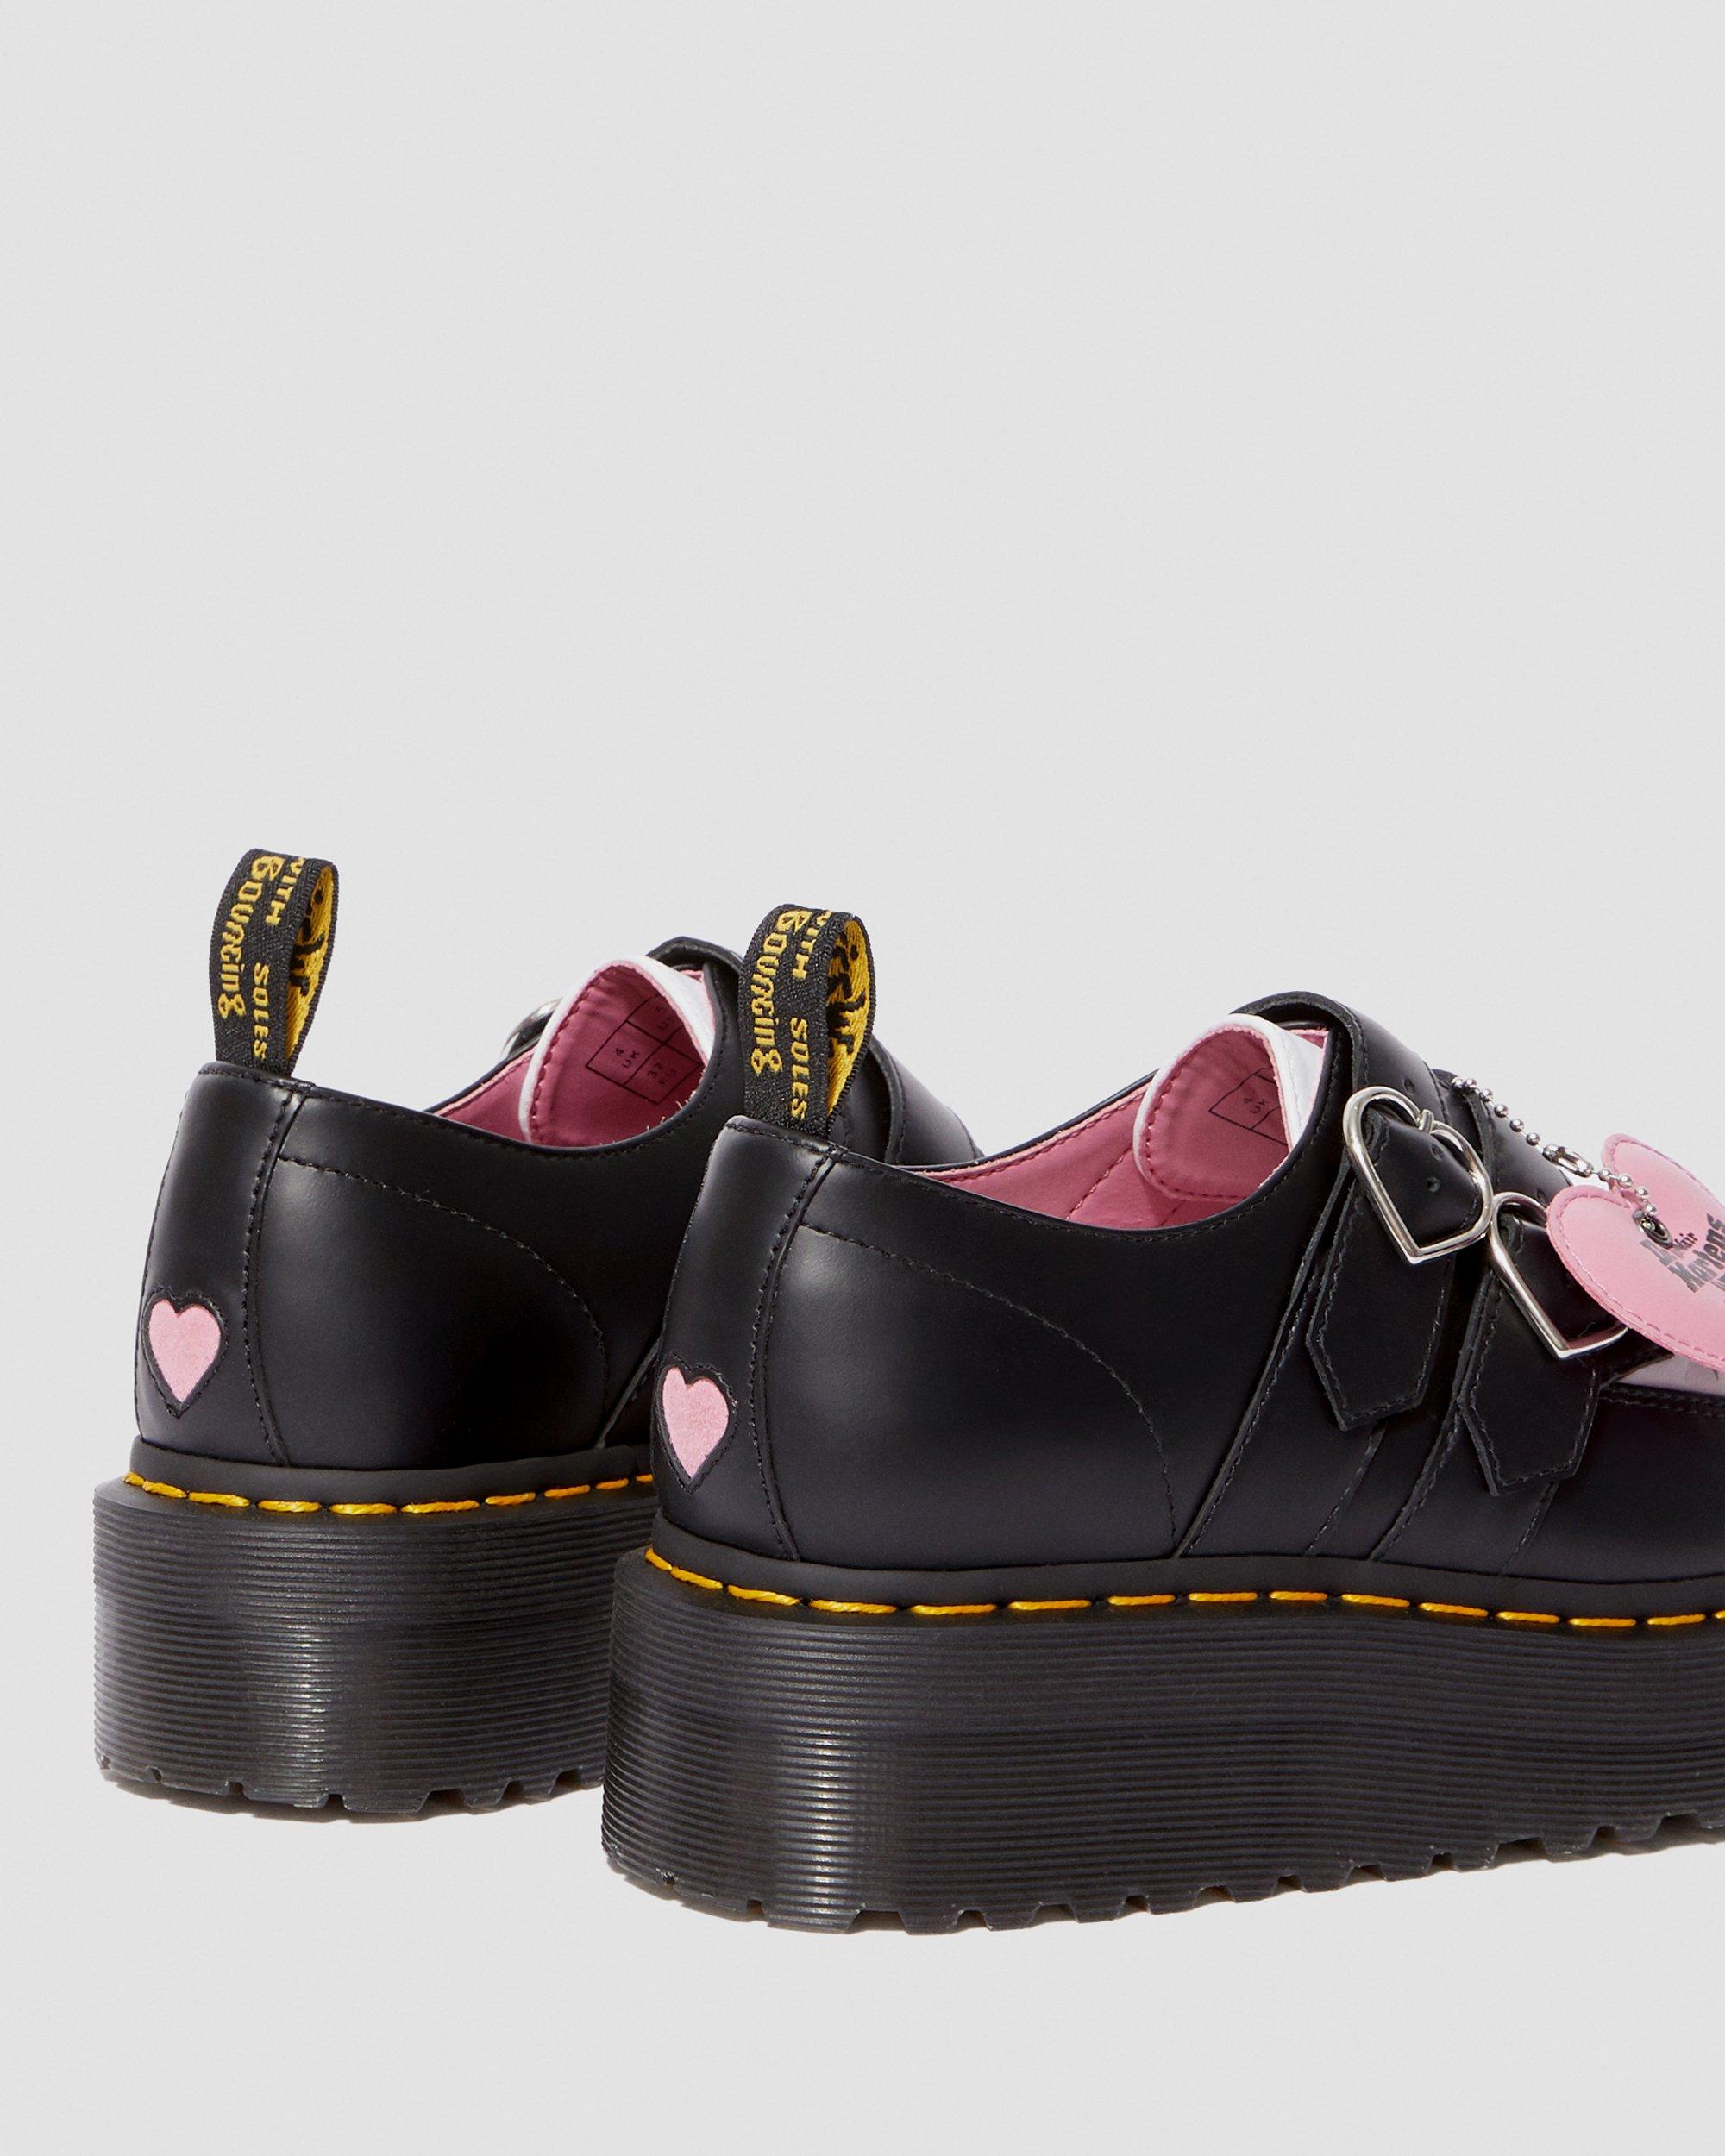 Lazy Oaf Buckle Creeper Dr. Martens